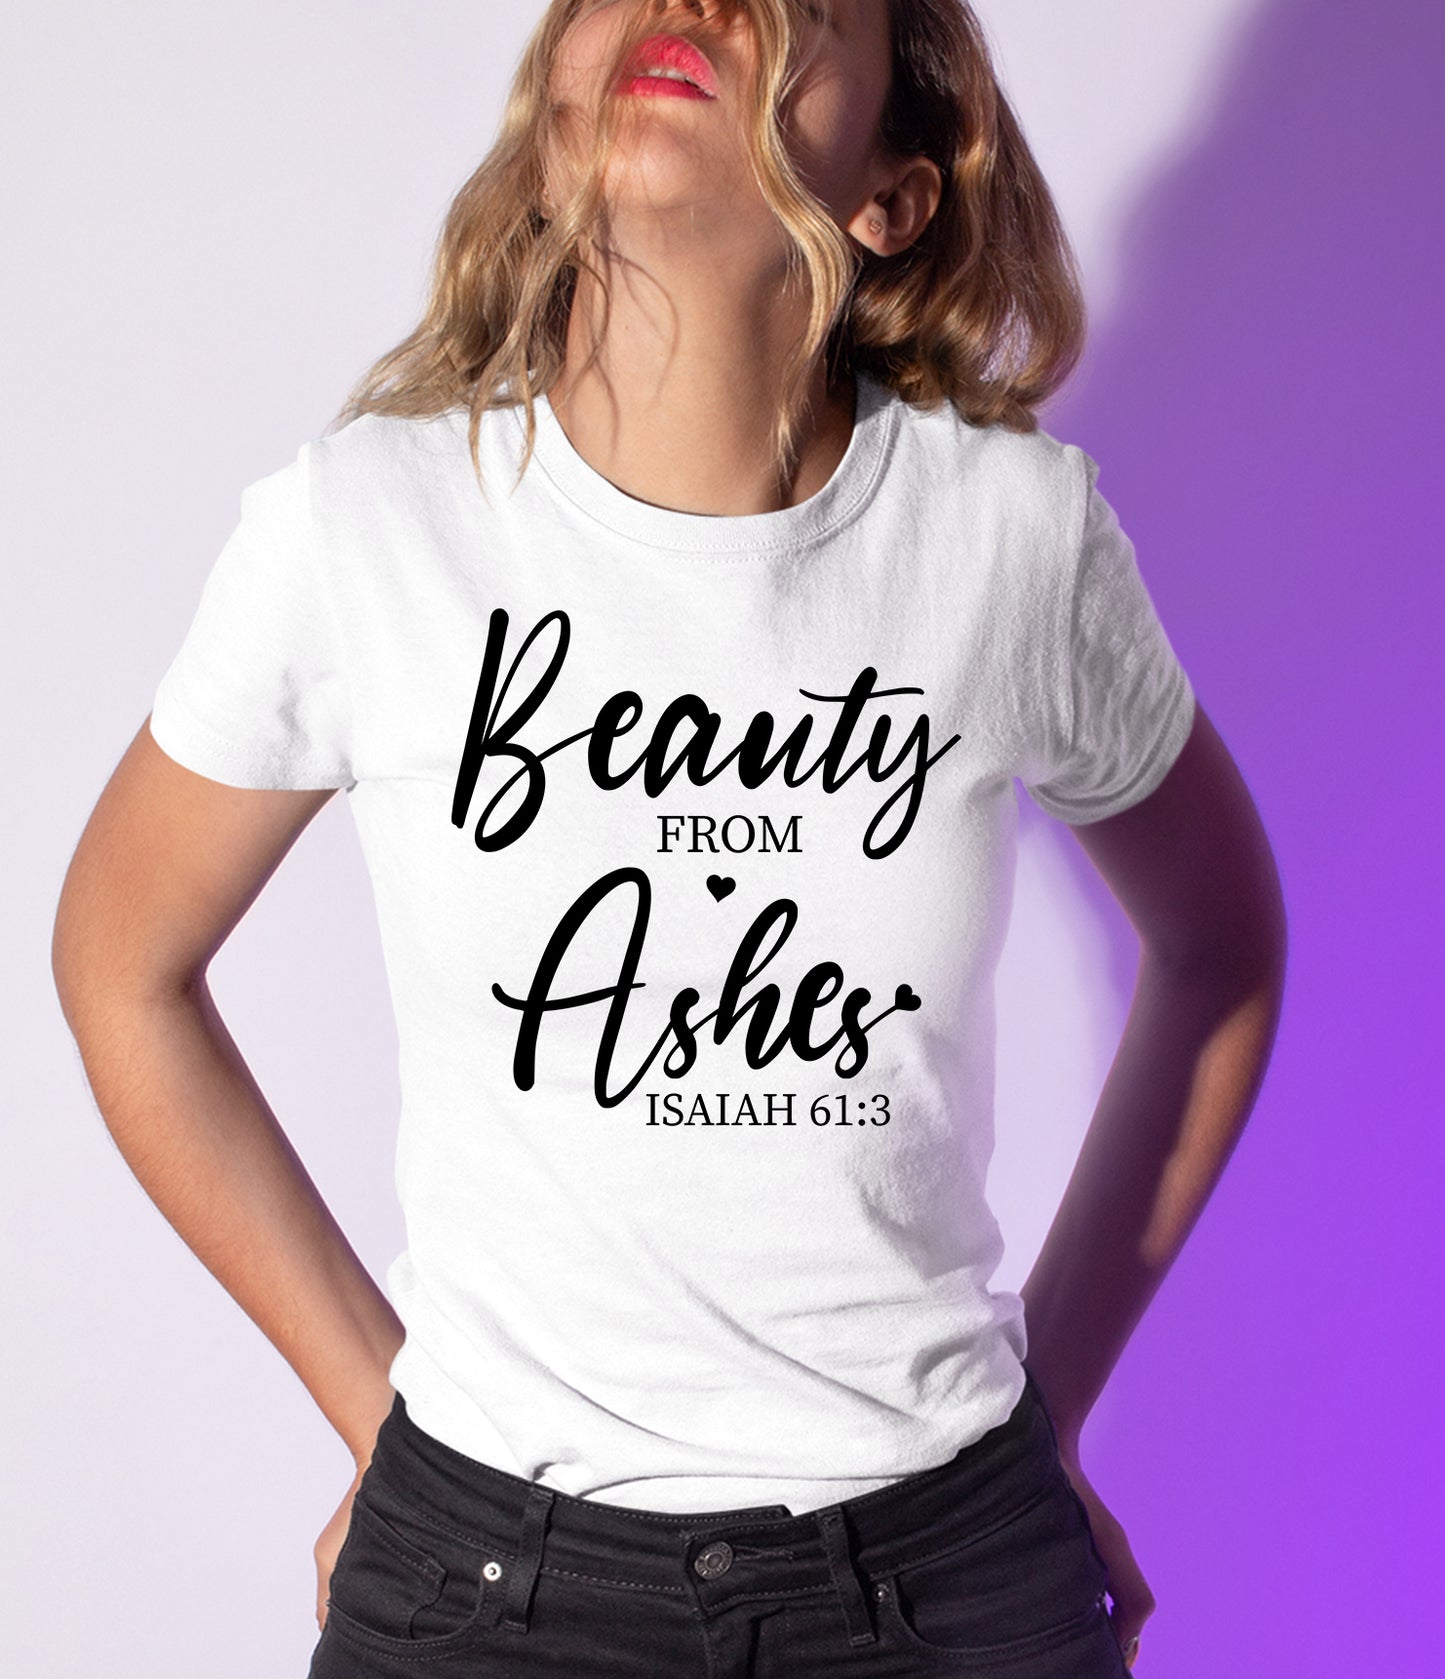 Beauty From Ashes Christian T Shirt Isaiah 61:3 Bible verse Tees